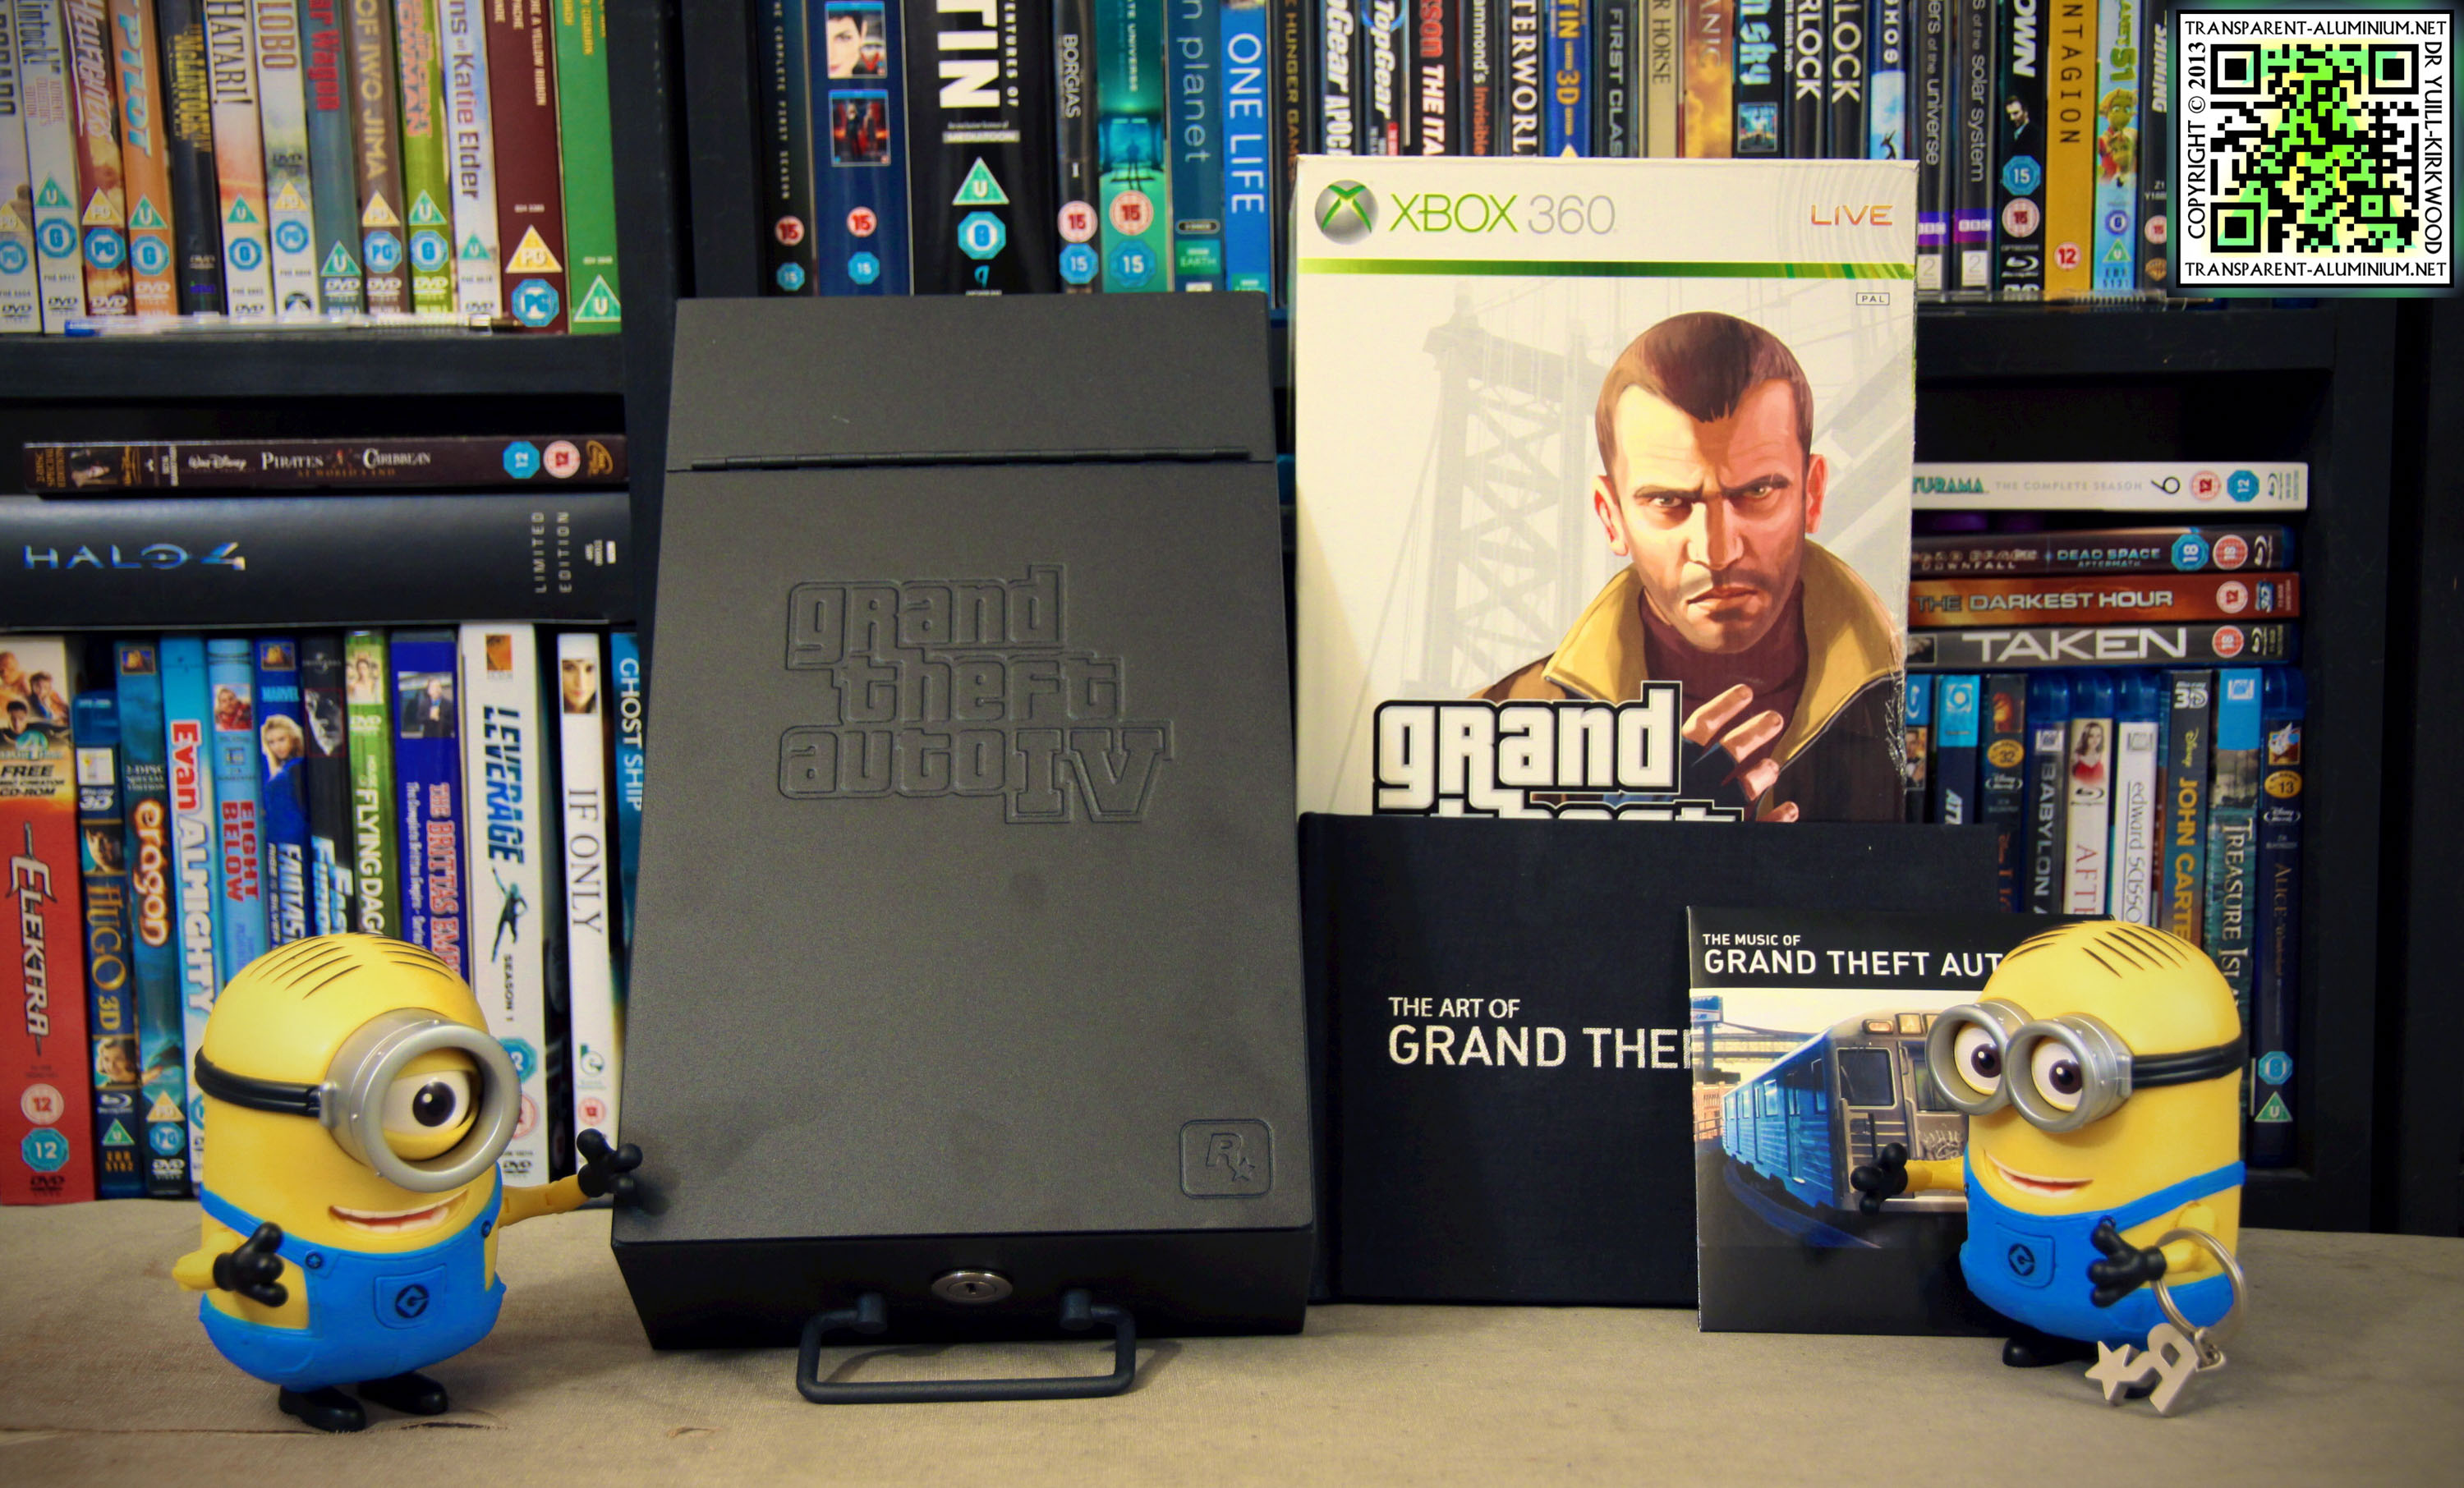 gta-4-collectors-editiongta-v-special-edition-and-collectors-edition-detailed-by-rockstar-mtzr05bm